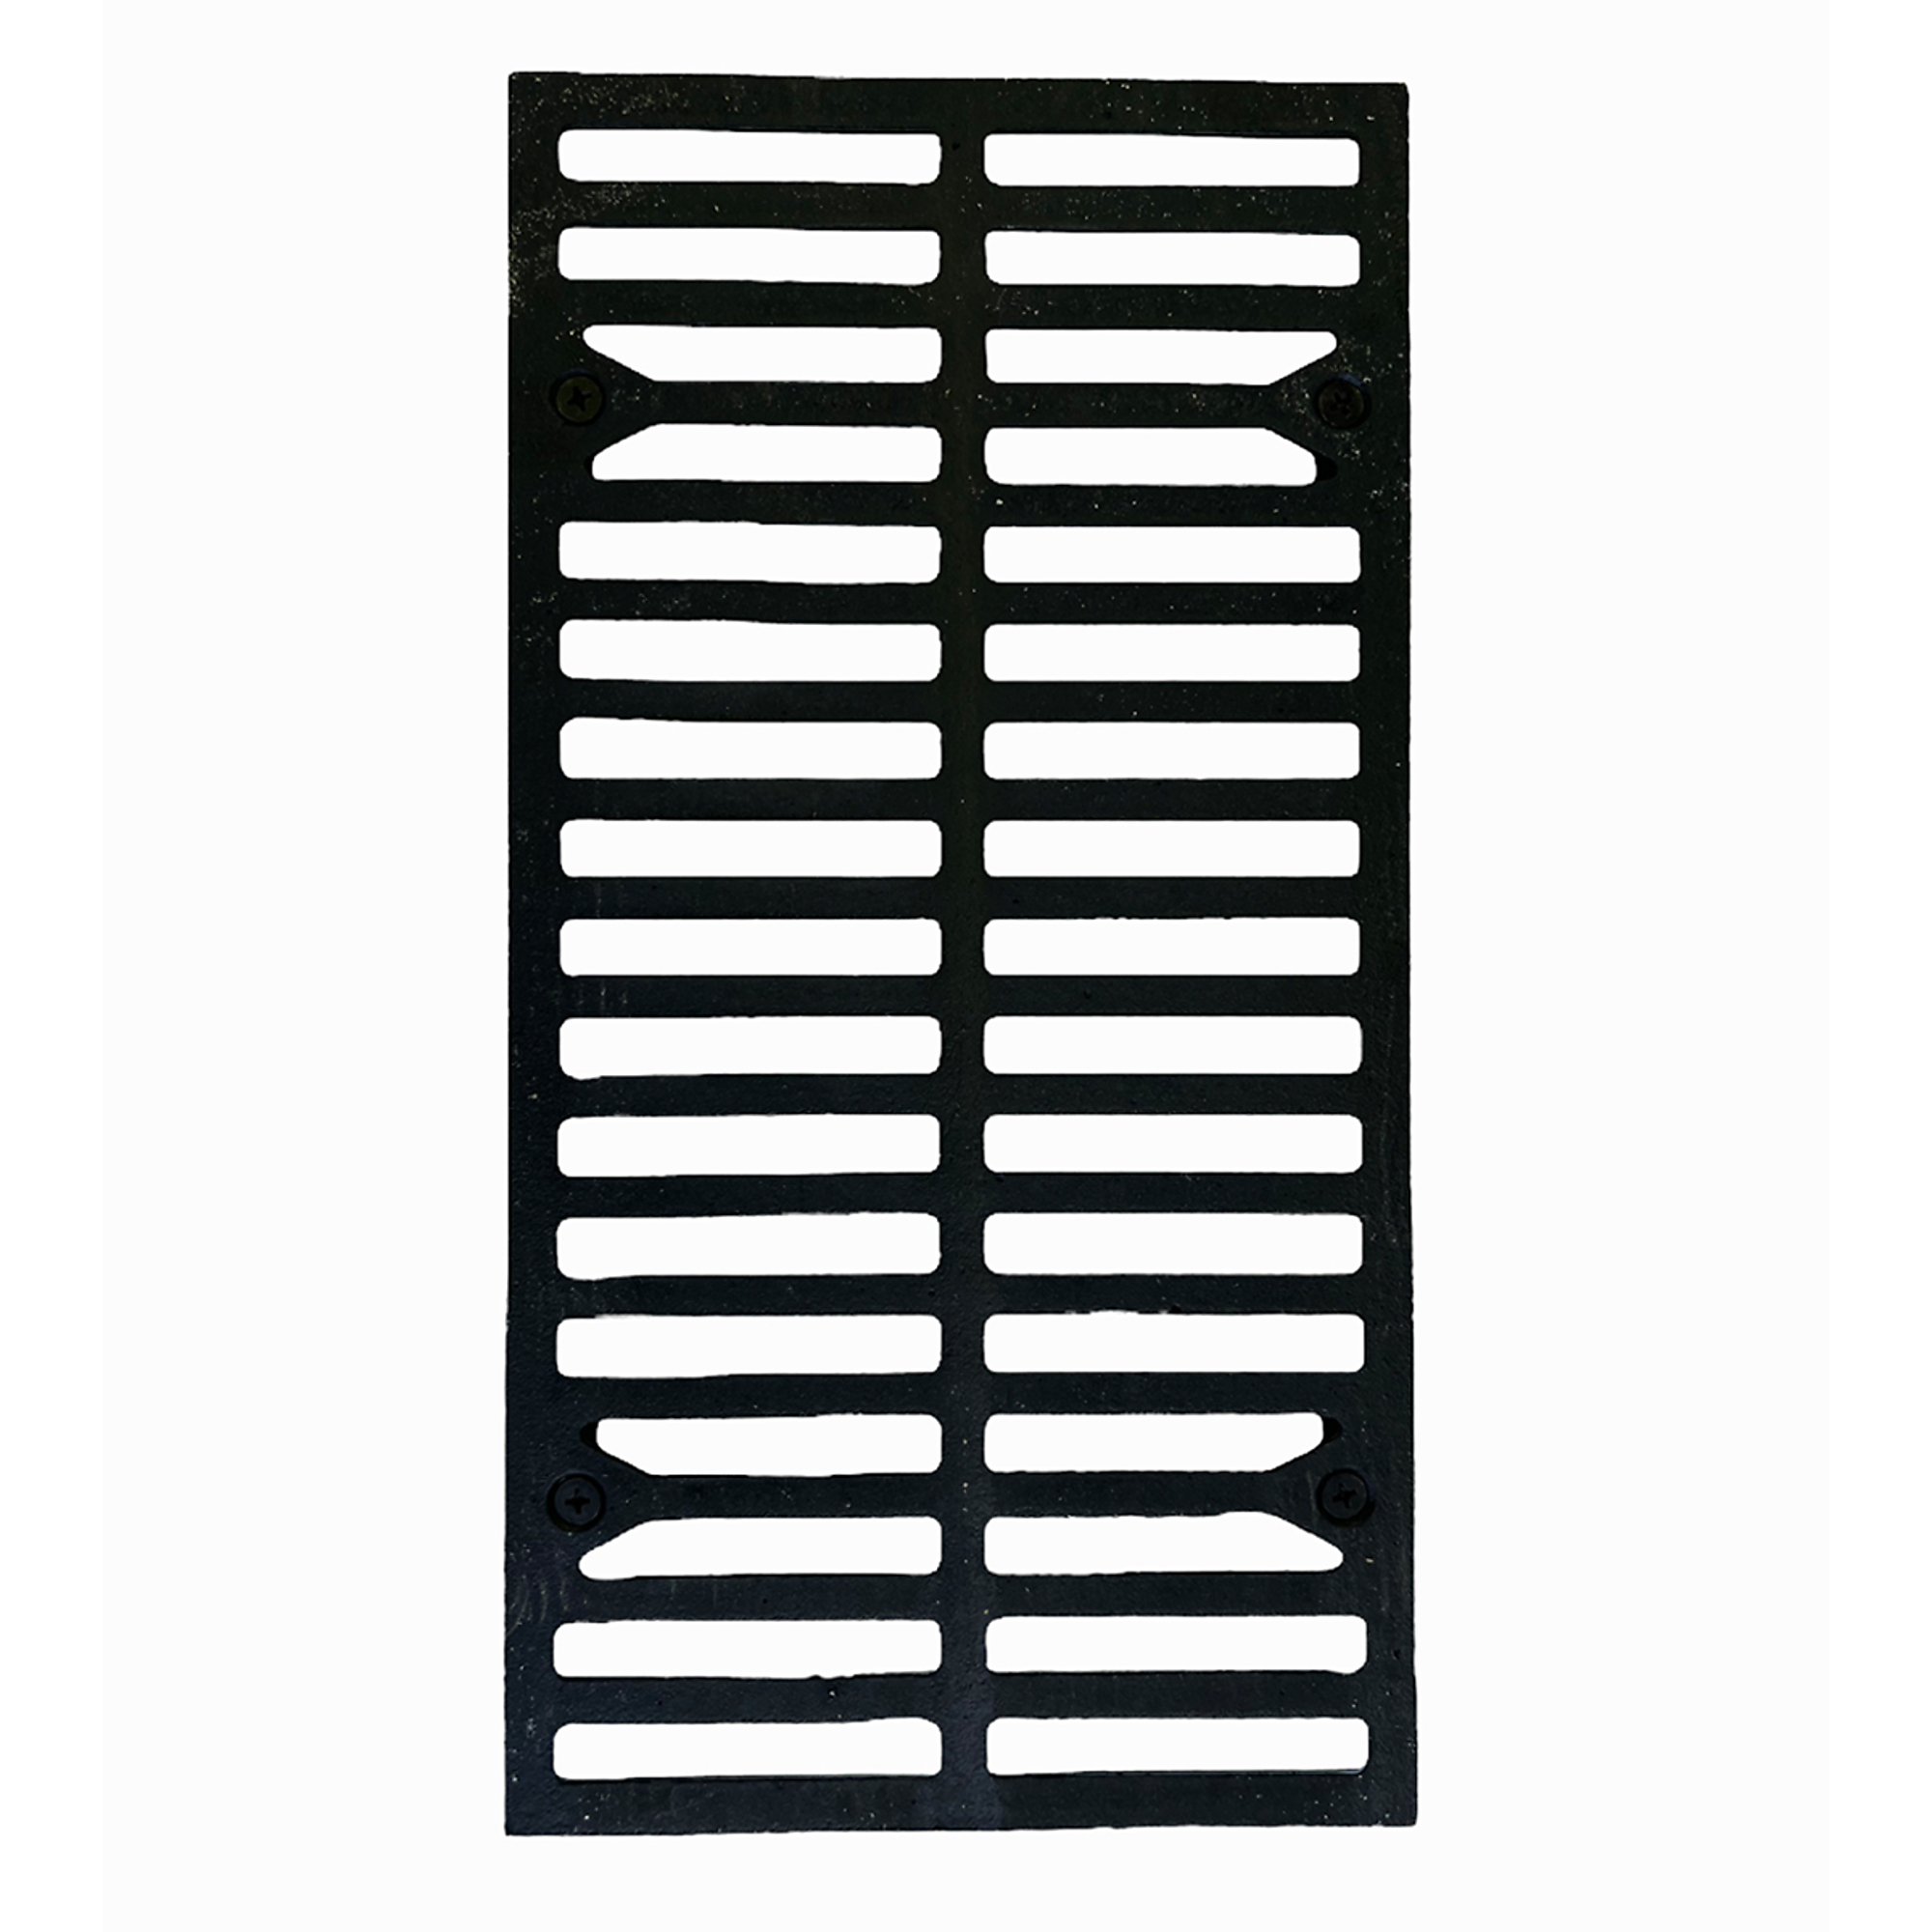 US Stove Company, Large Grate for 2421 and Logwood Stoves, Included (qty.) 1 Model G42